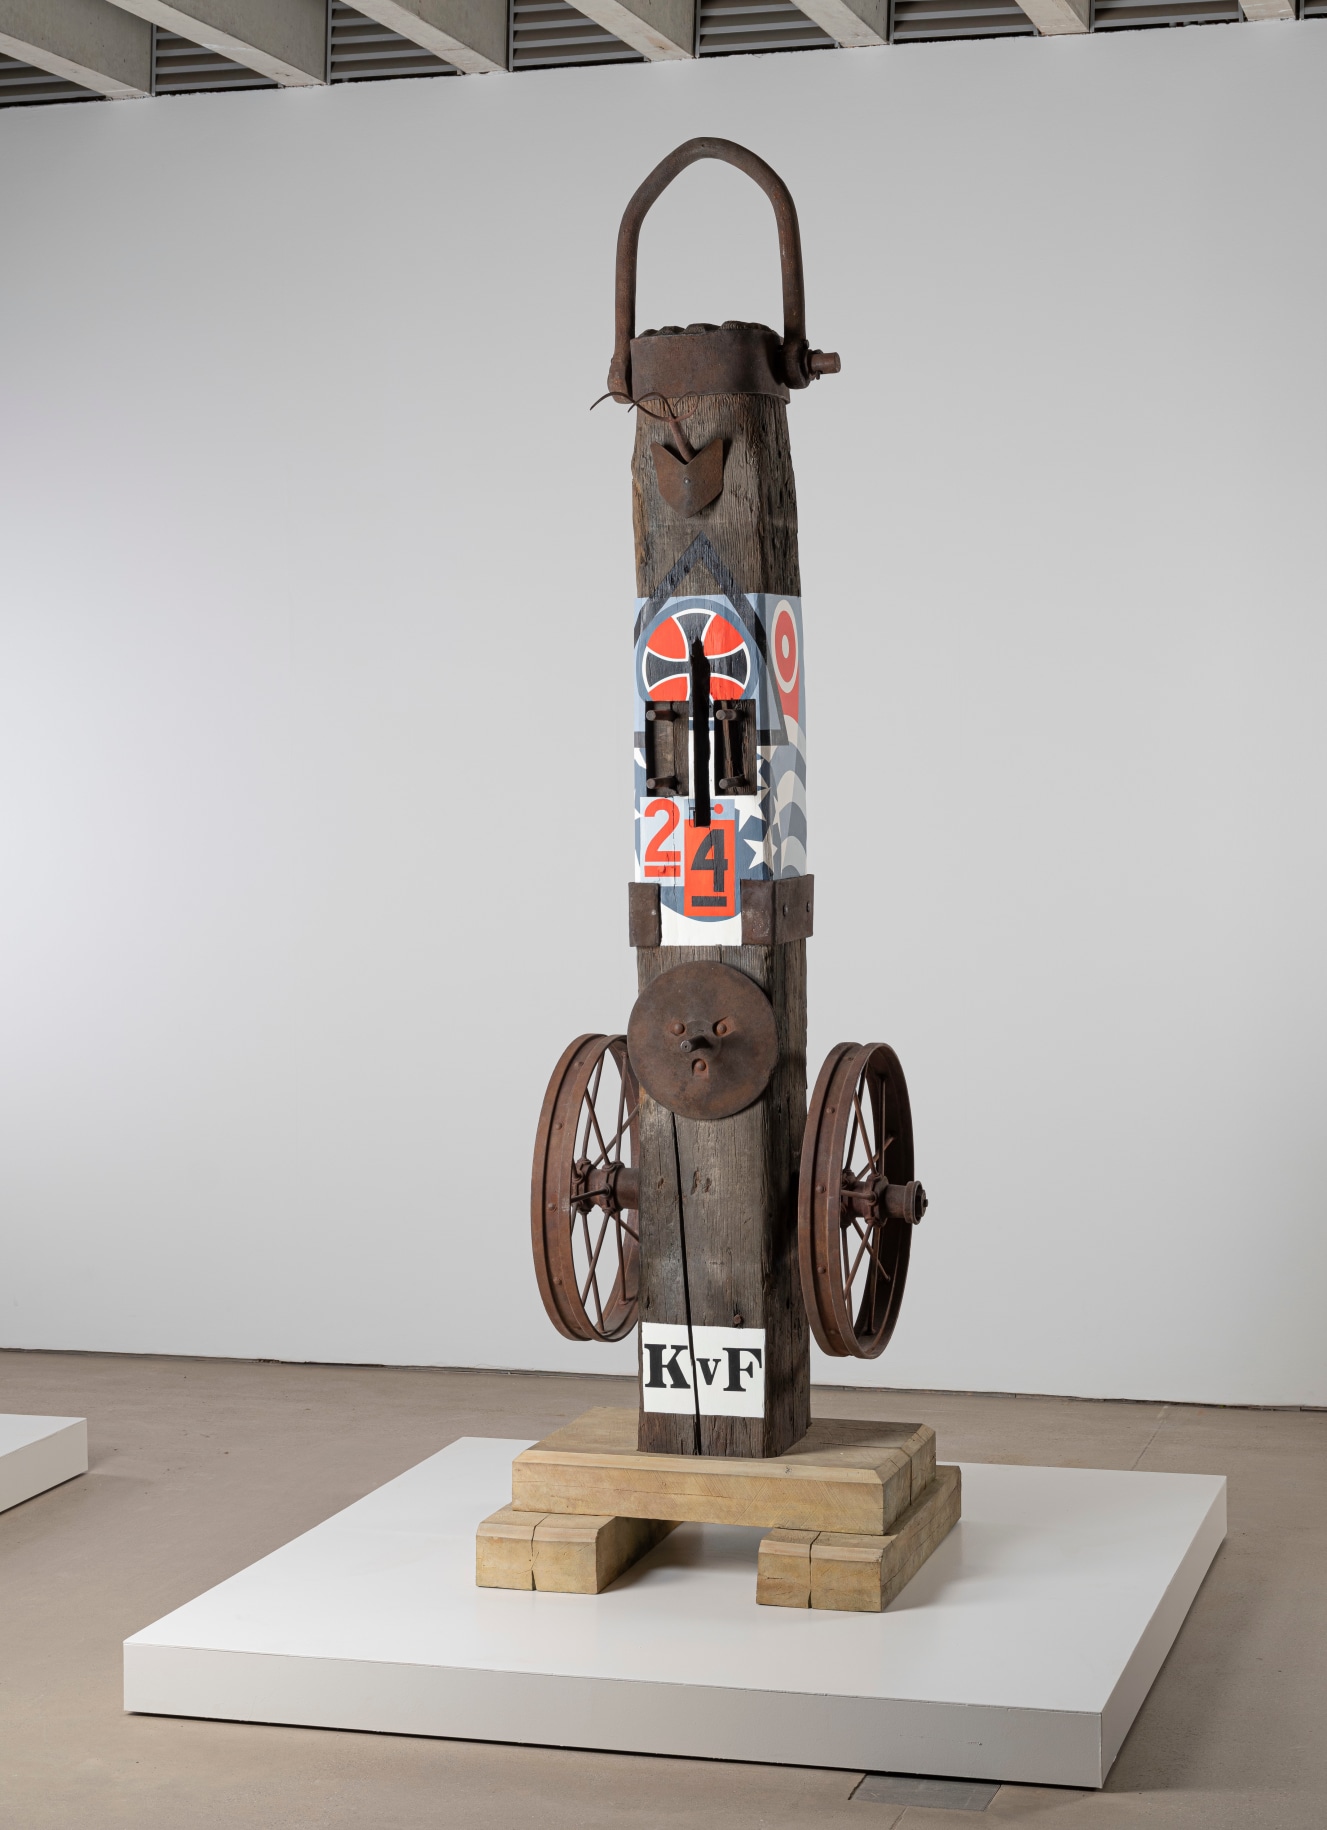 A 138 1/8 by 38 9/16 by 45 1/16 inch painted bronze sculpture consisting of a beam on a base. The work's title, &quot;KvF&quot; appears in stenciled letters against a white ground. A wheel is affixed to the right and left sides of the sculpture. On the front of the sculpture, level with the top of the wheels, is a disk. Above this a section of the sculpture has been painted with red, blue, white, and black designs that include a cross, stars, and the numbers 2 and 4. At the top of the sculpture is a cap with a handle.